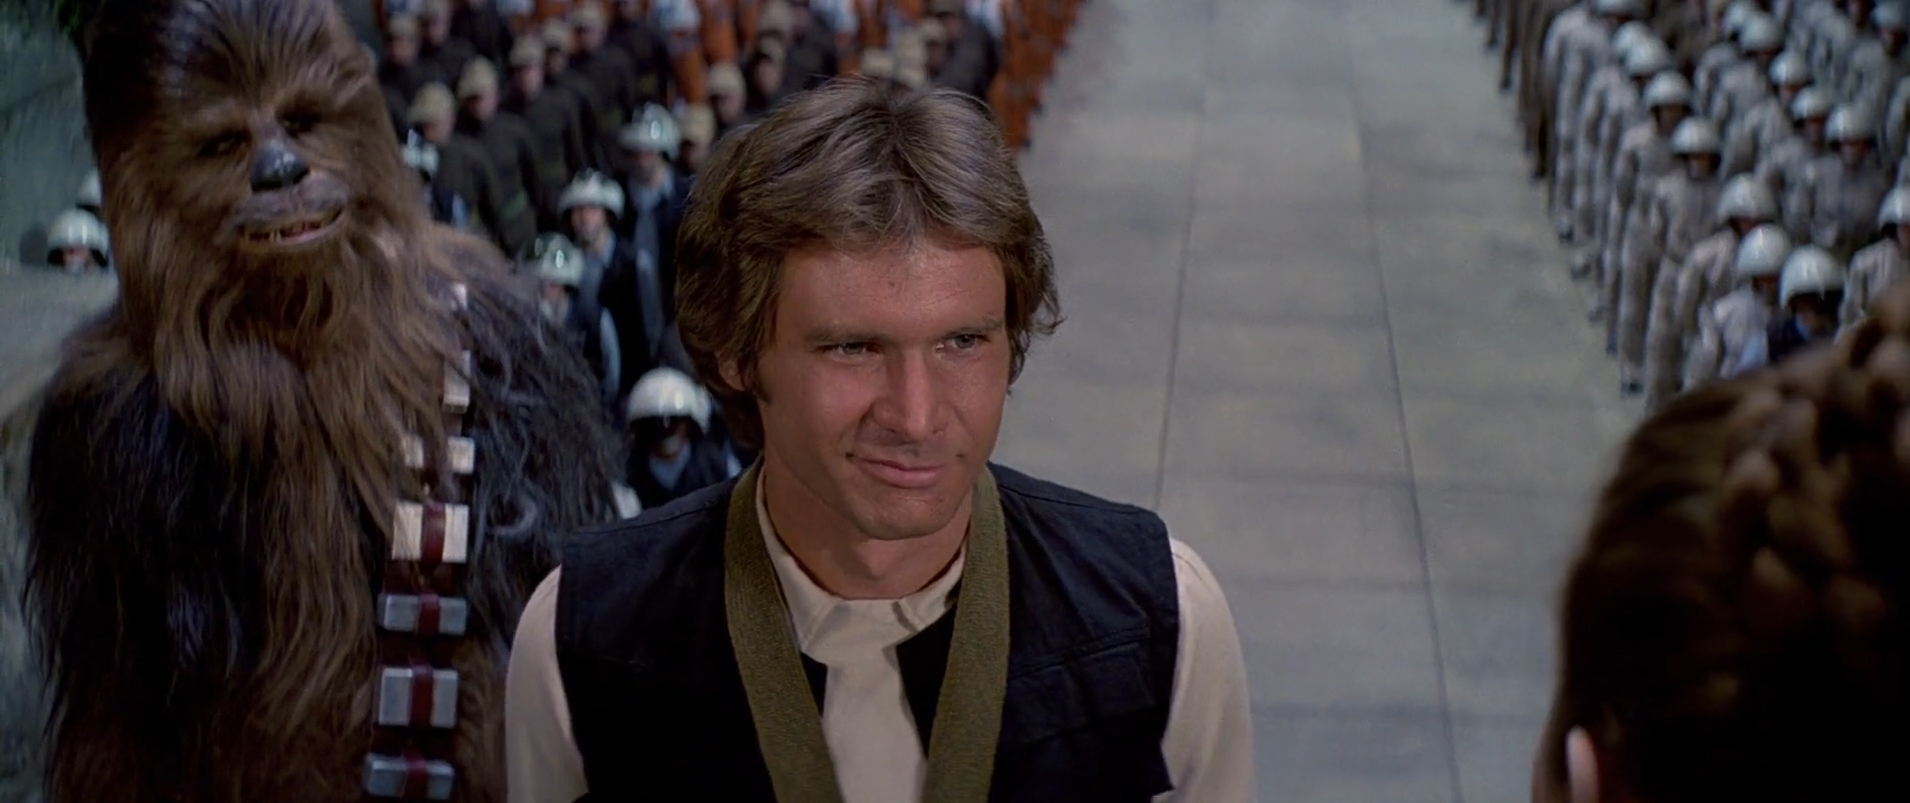 Happy 78th birthday to the man who portrayed two of my favorite fictional characters of all time, Harrison Ford! 